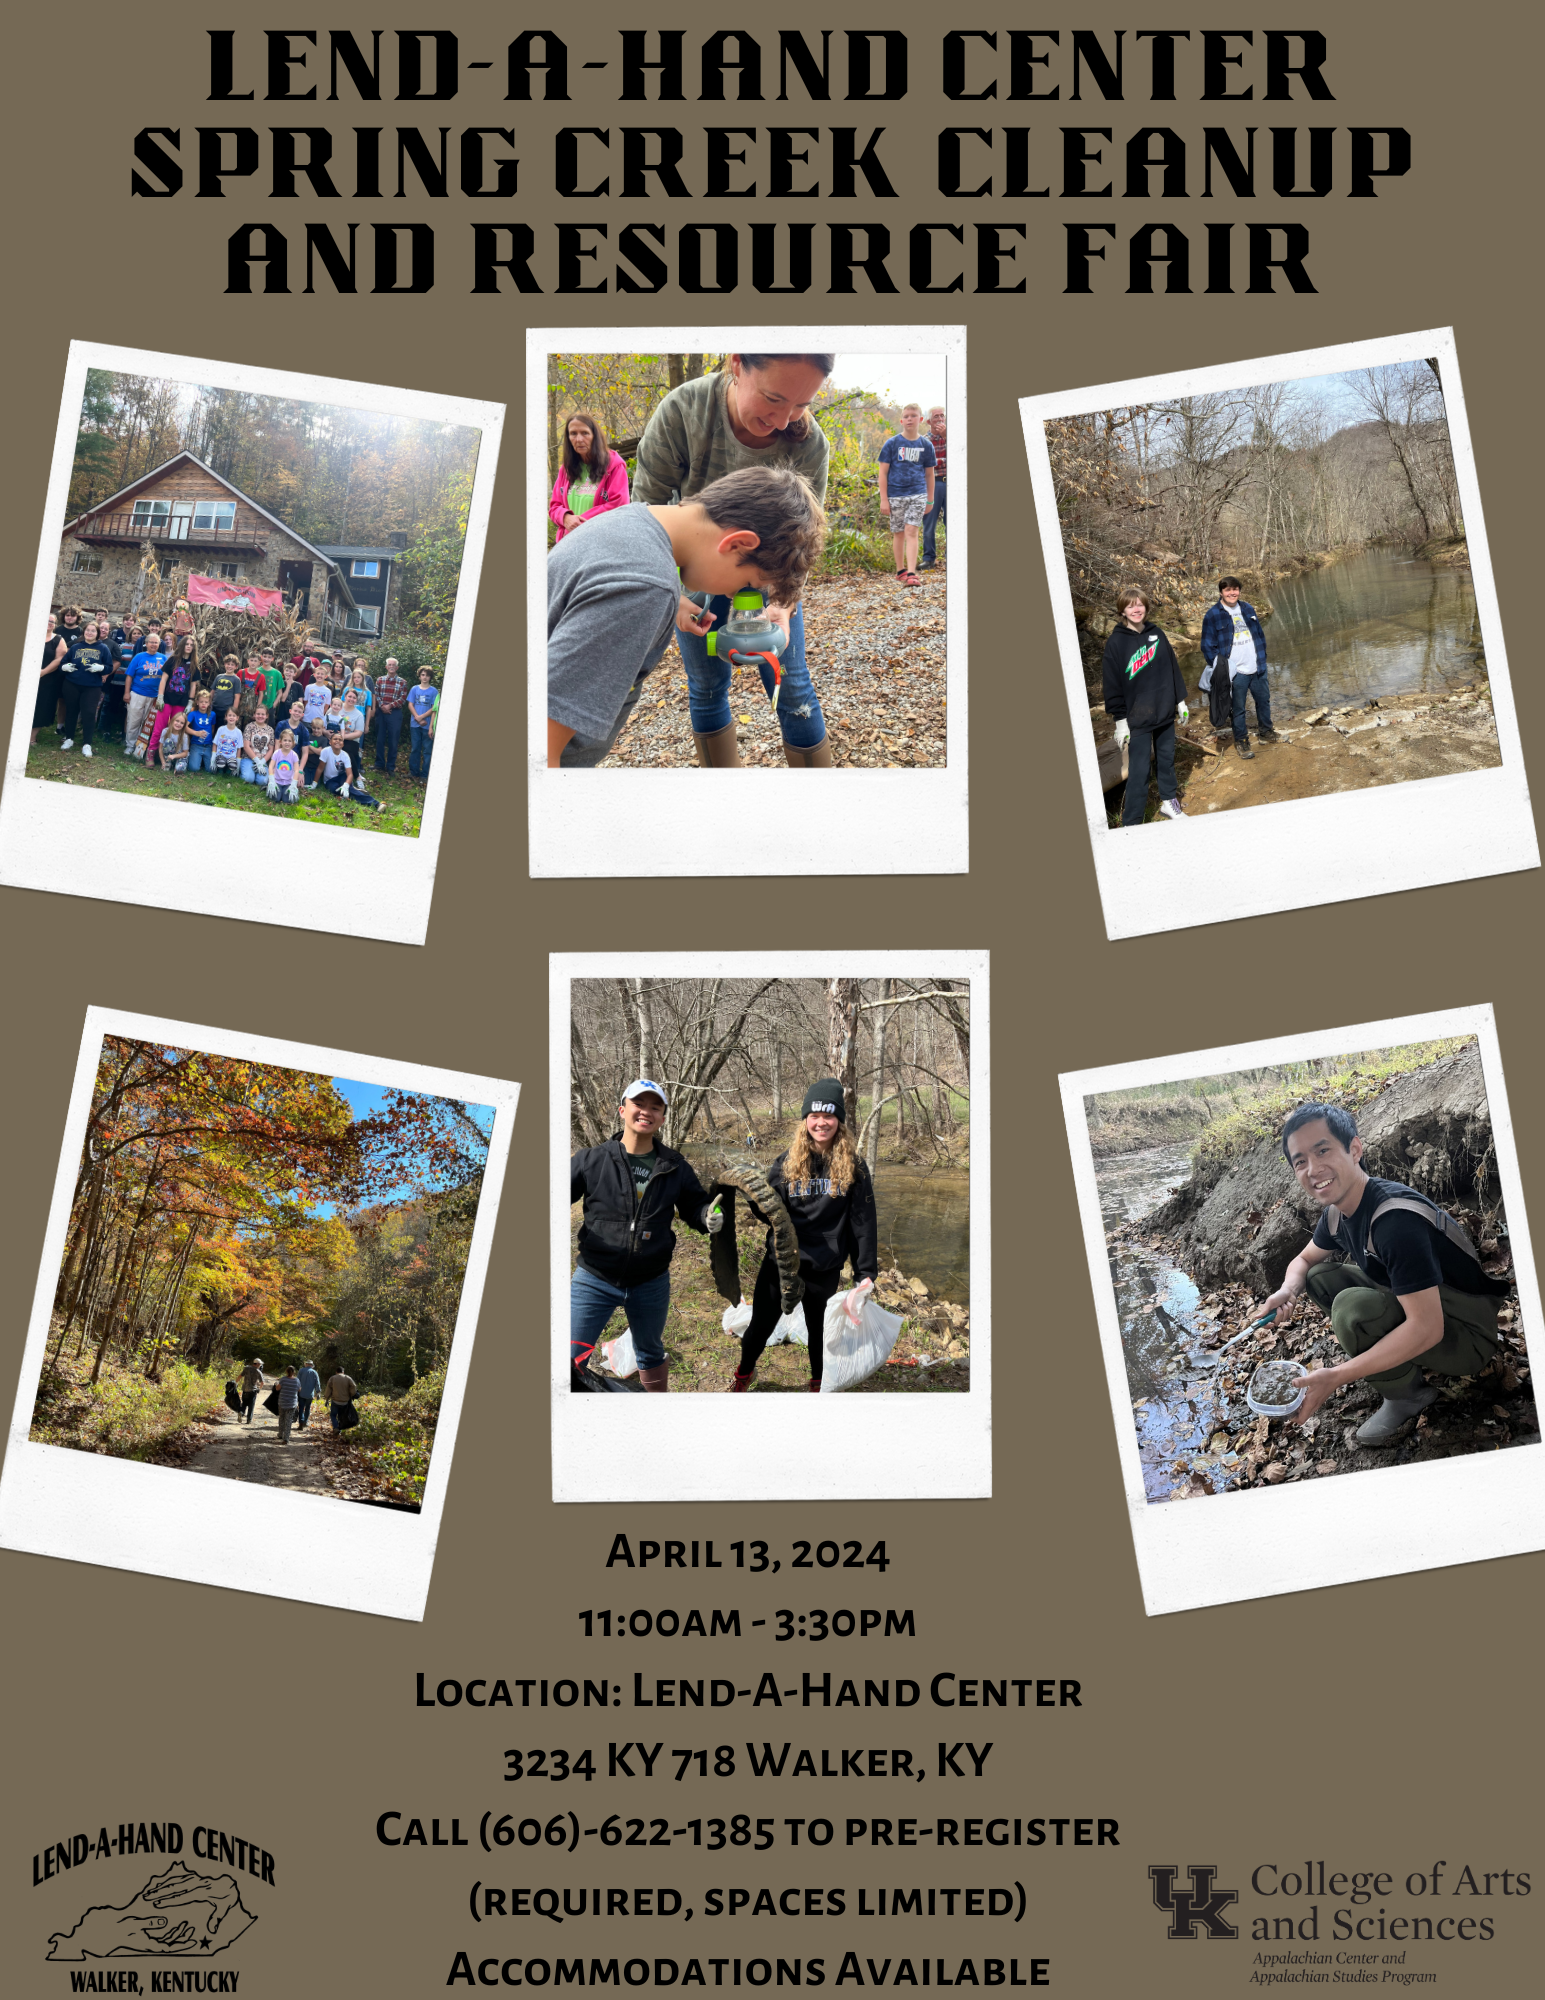 Lend-A-Hand Center Spring Creek Cleanup and Resource Fair Poster